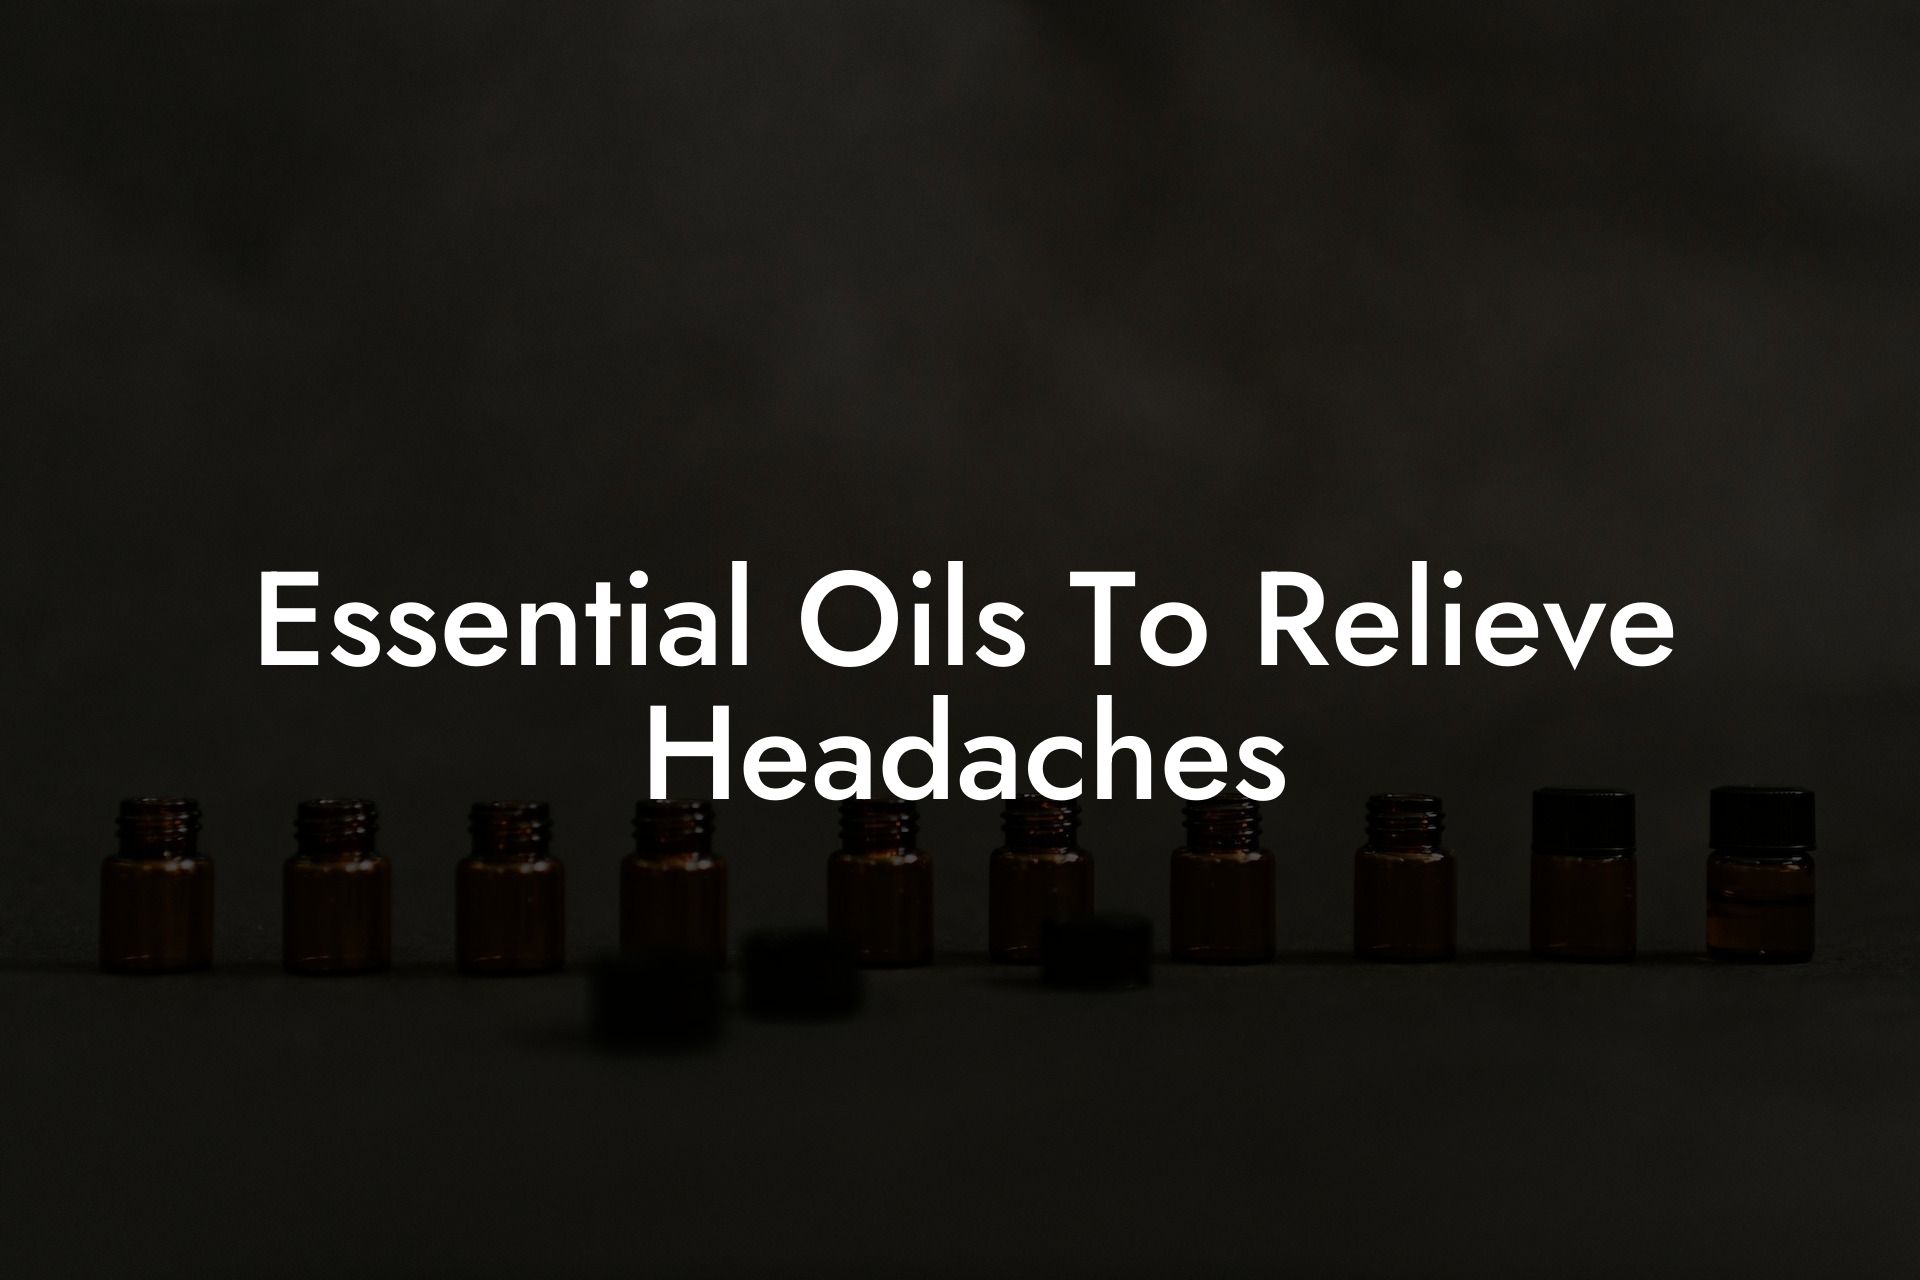 Essential Oils To Relieve Headaches